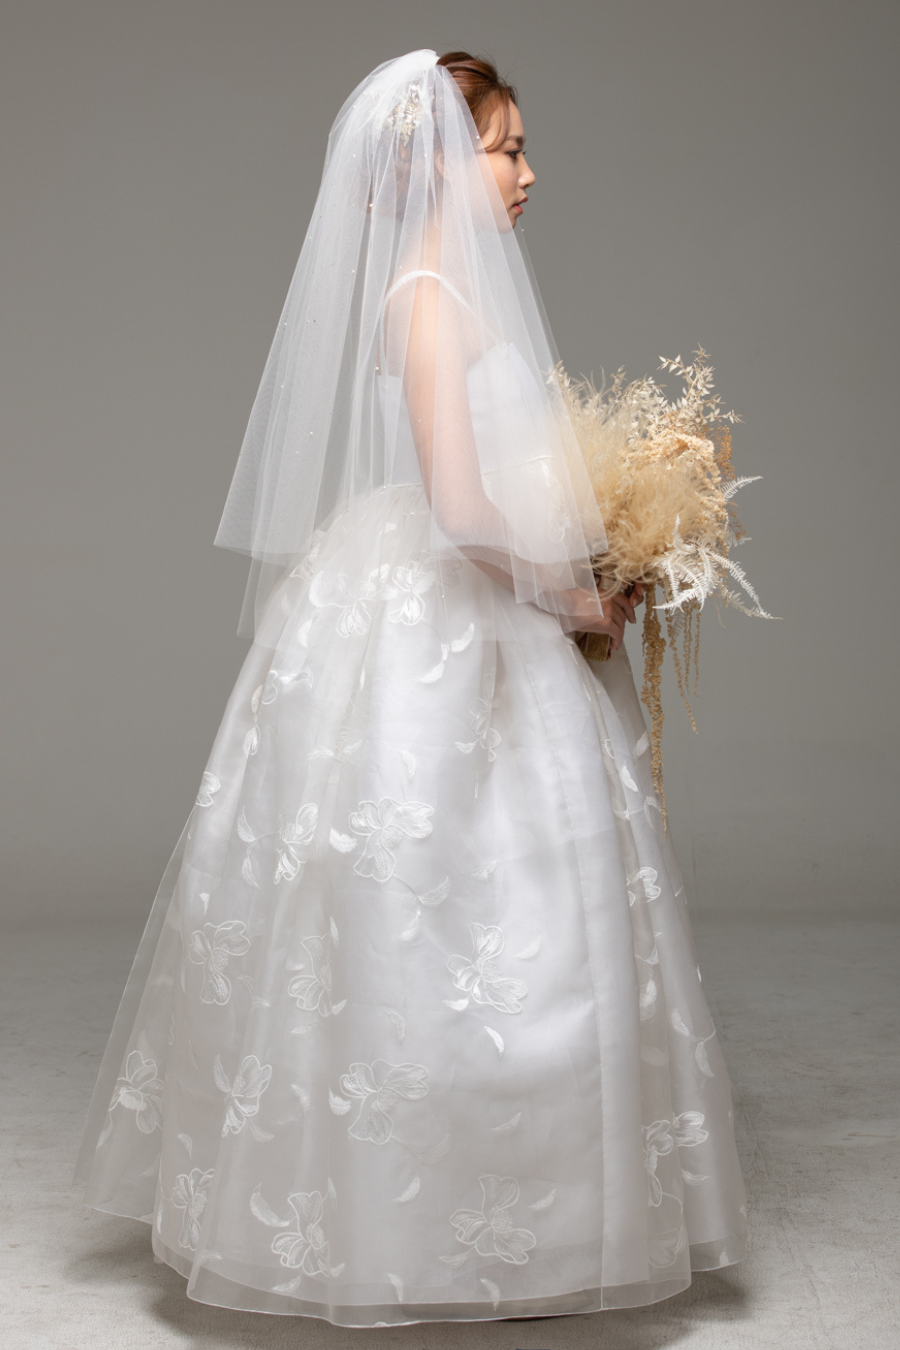 Her Wedding Dress (veil not included)